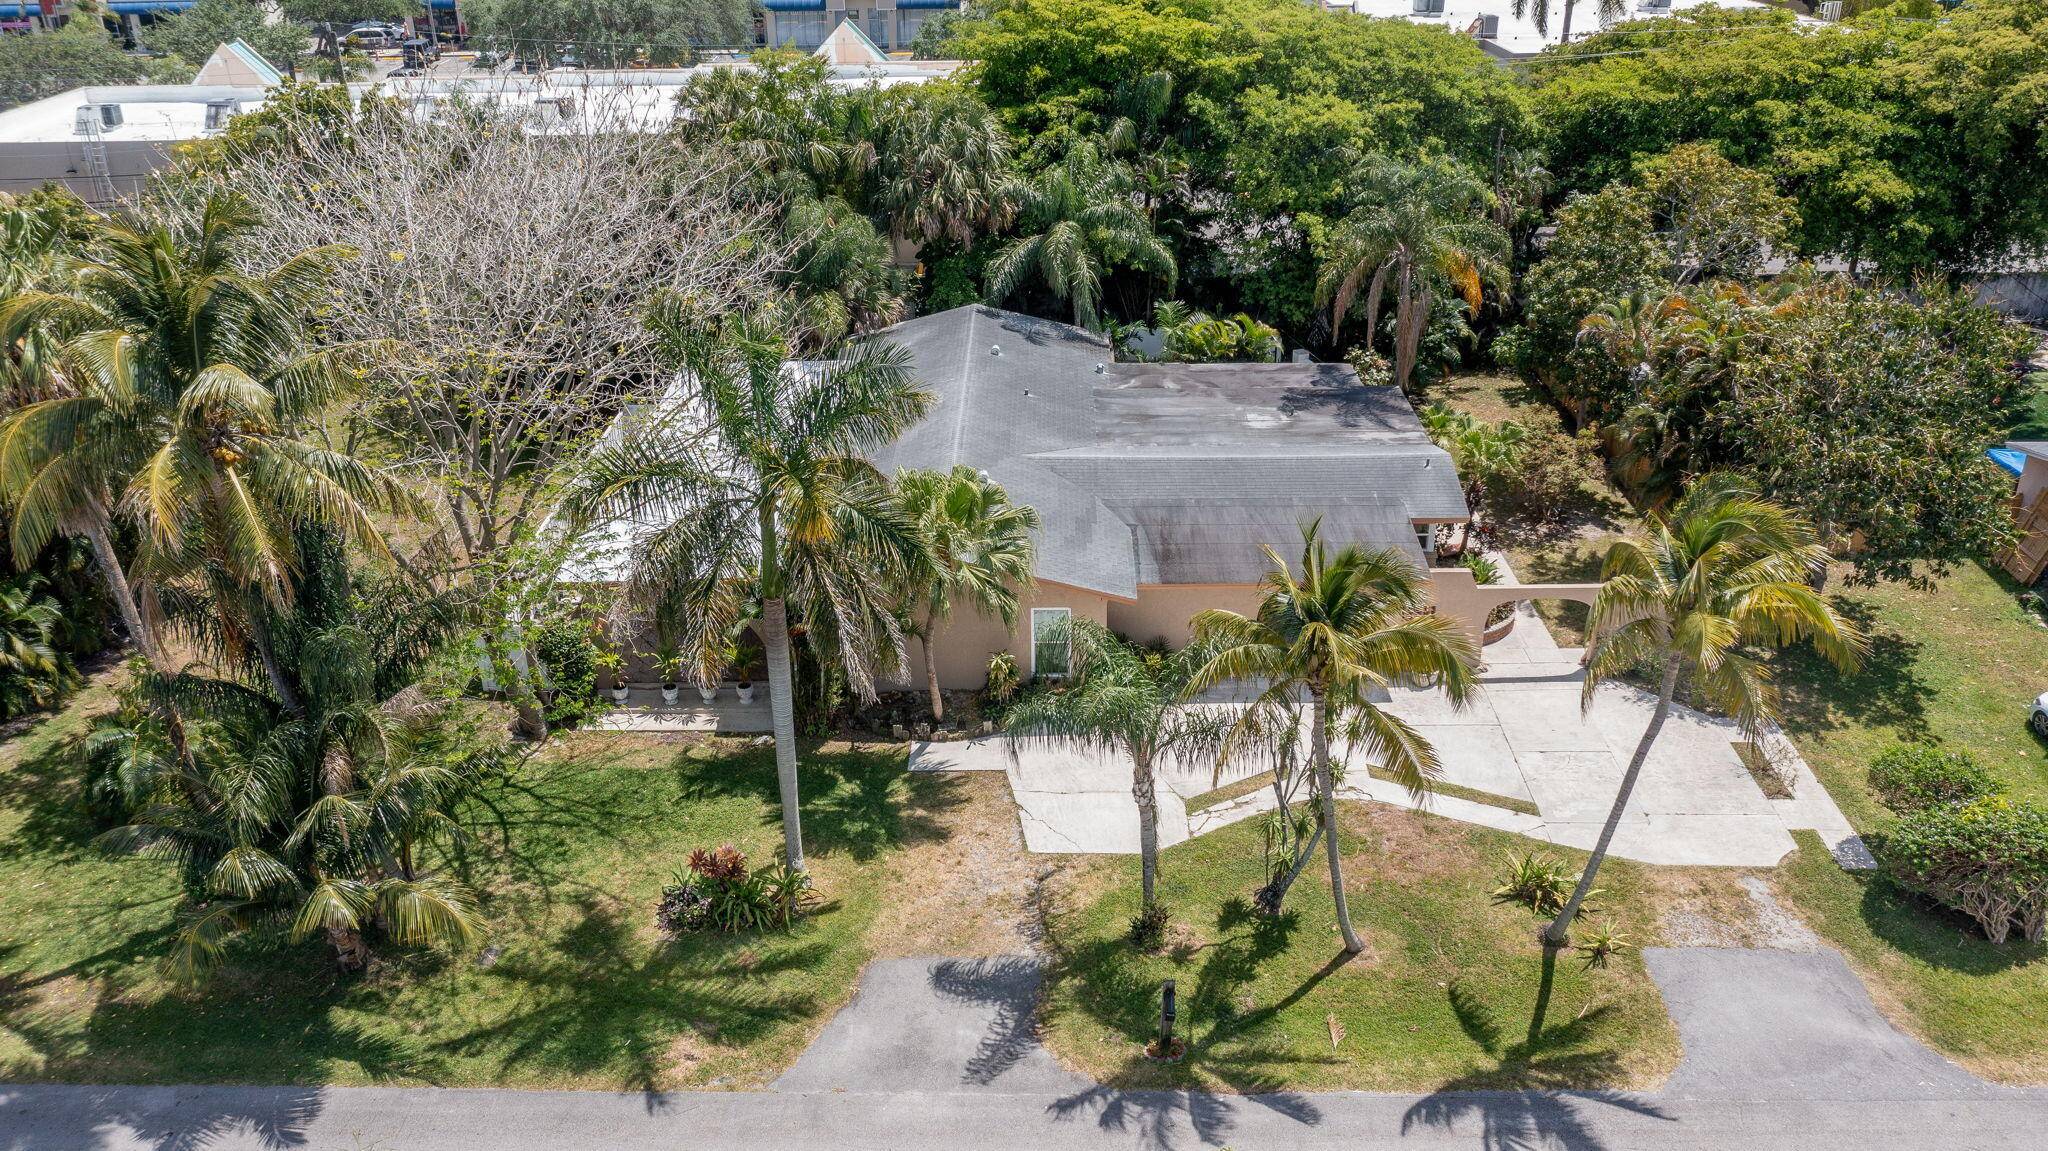 4584 Holt Road, West Palm Beach, FL 33415 is a hidden gem in West Palm Beach, offering nearly half an acre of land with a spacious house 2335 sqft under ...